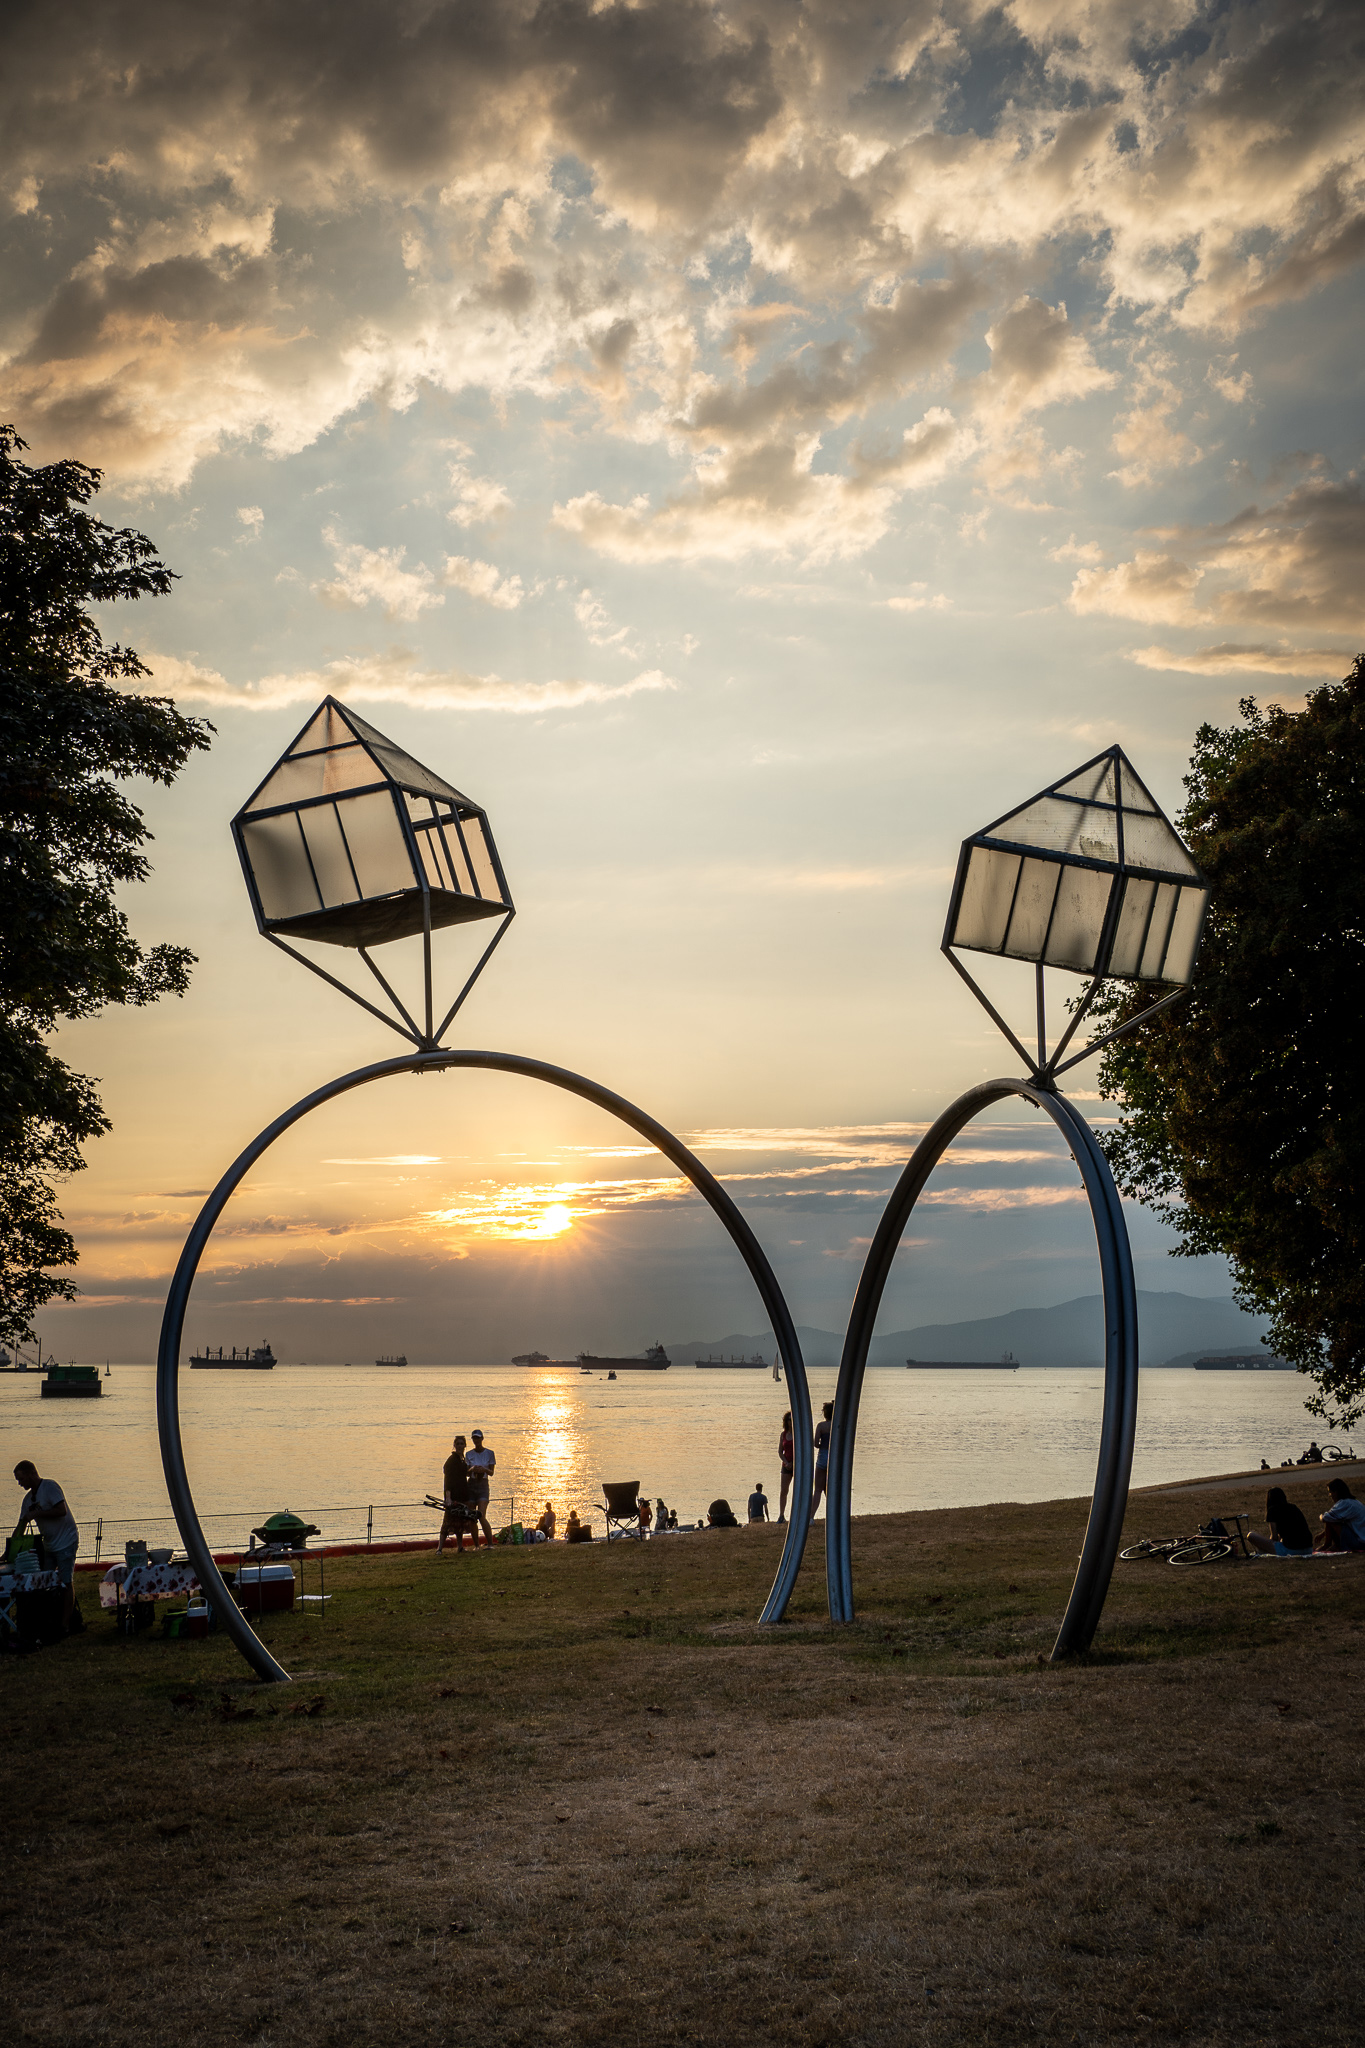 Engagement Ring Sculpture Vancouver BC Canada Sunset